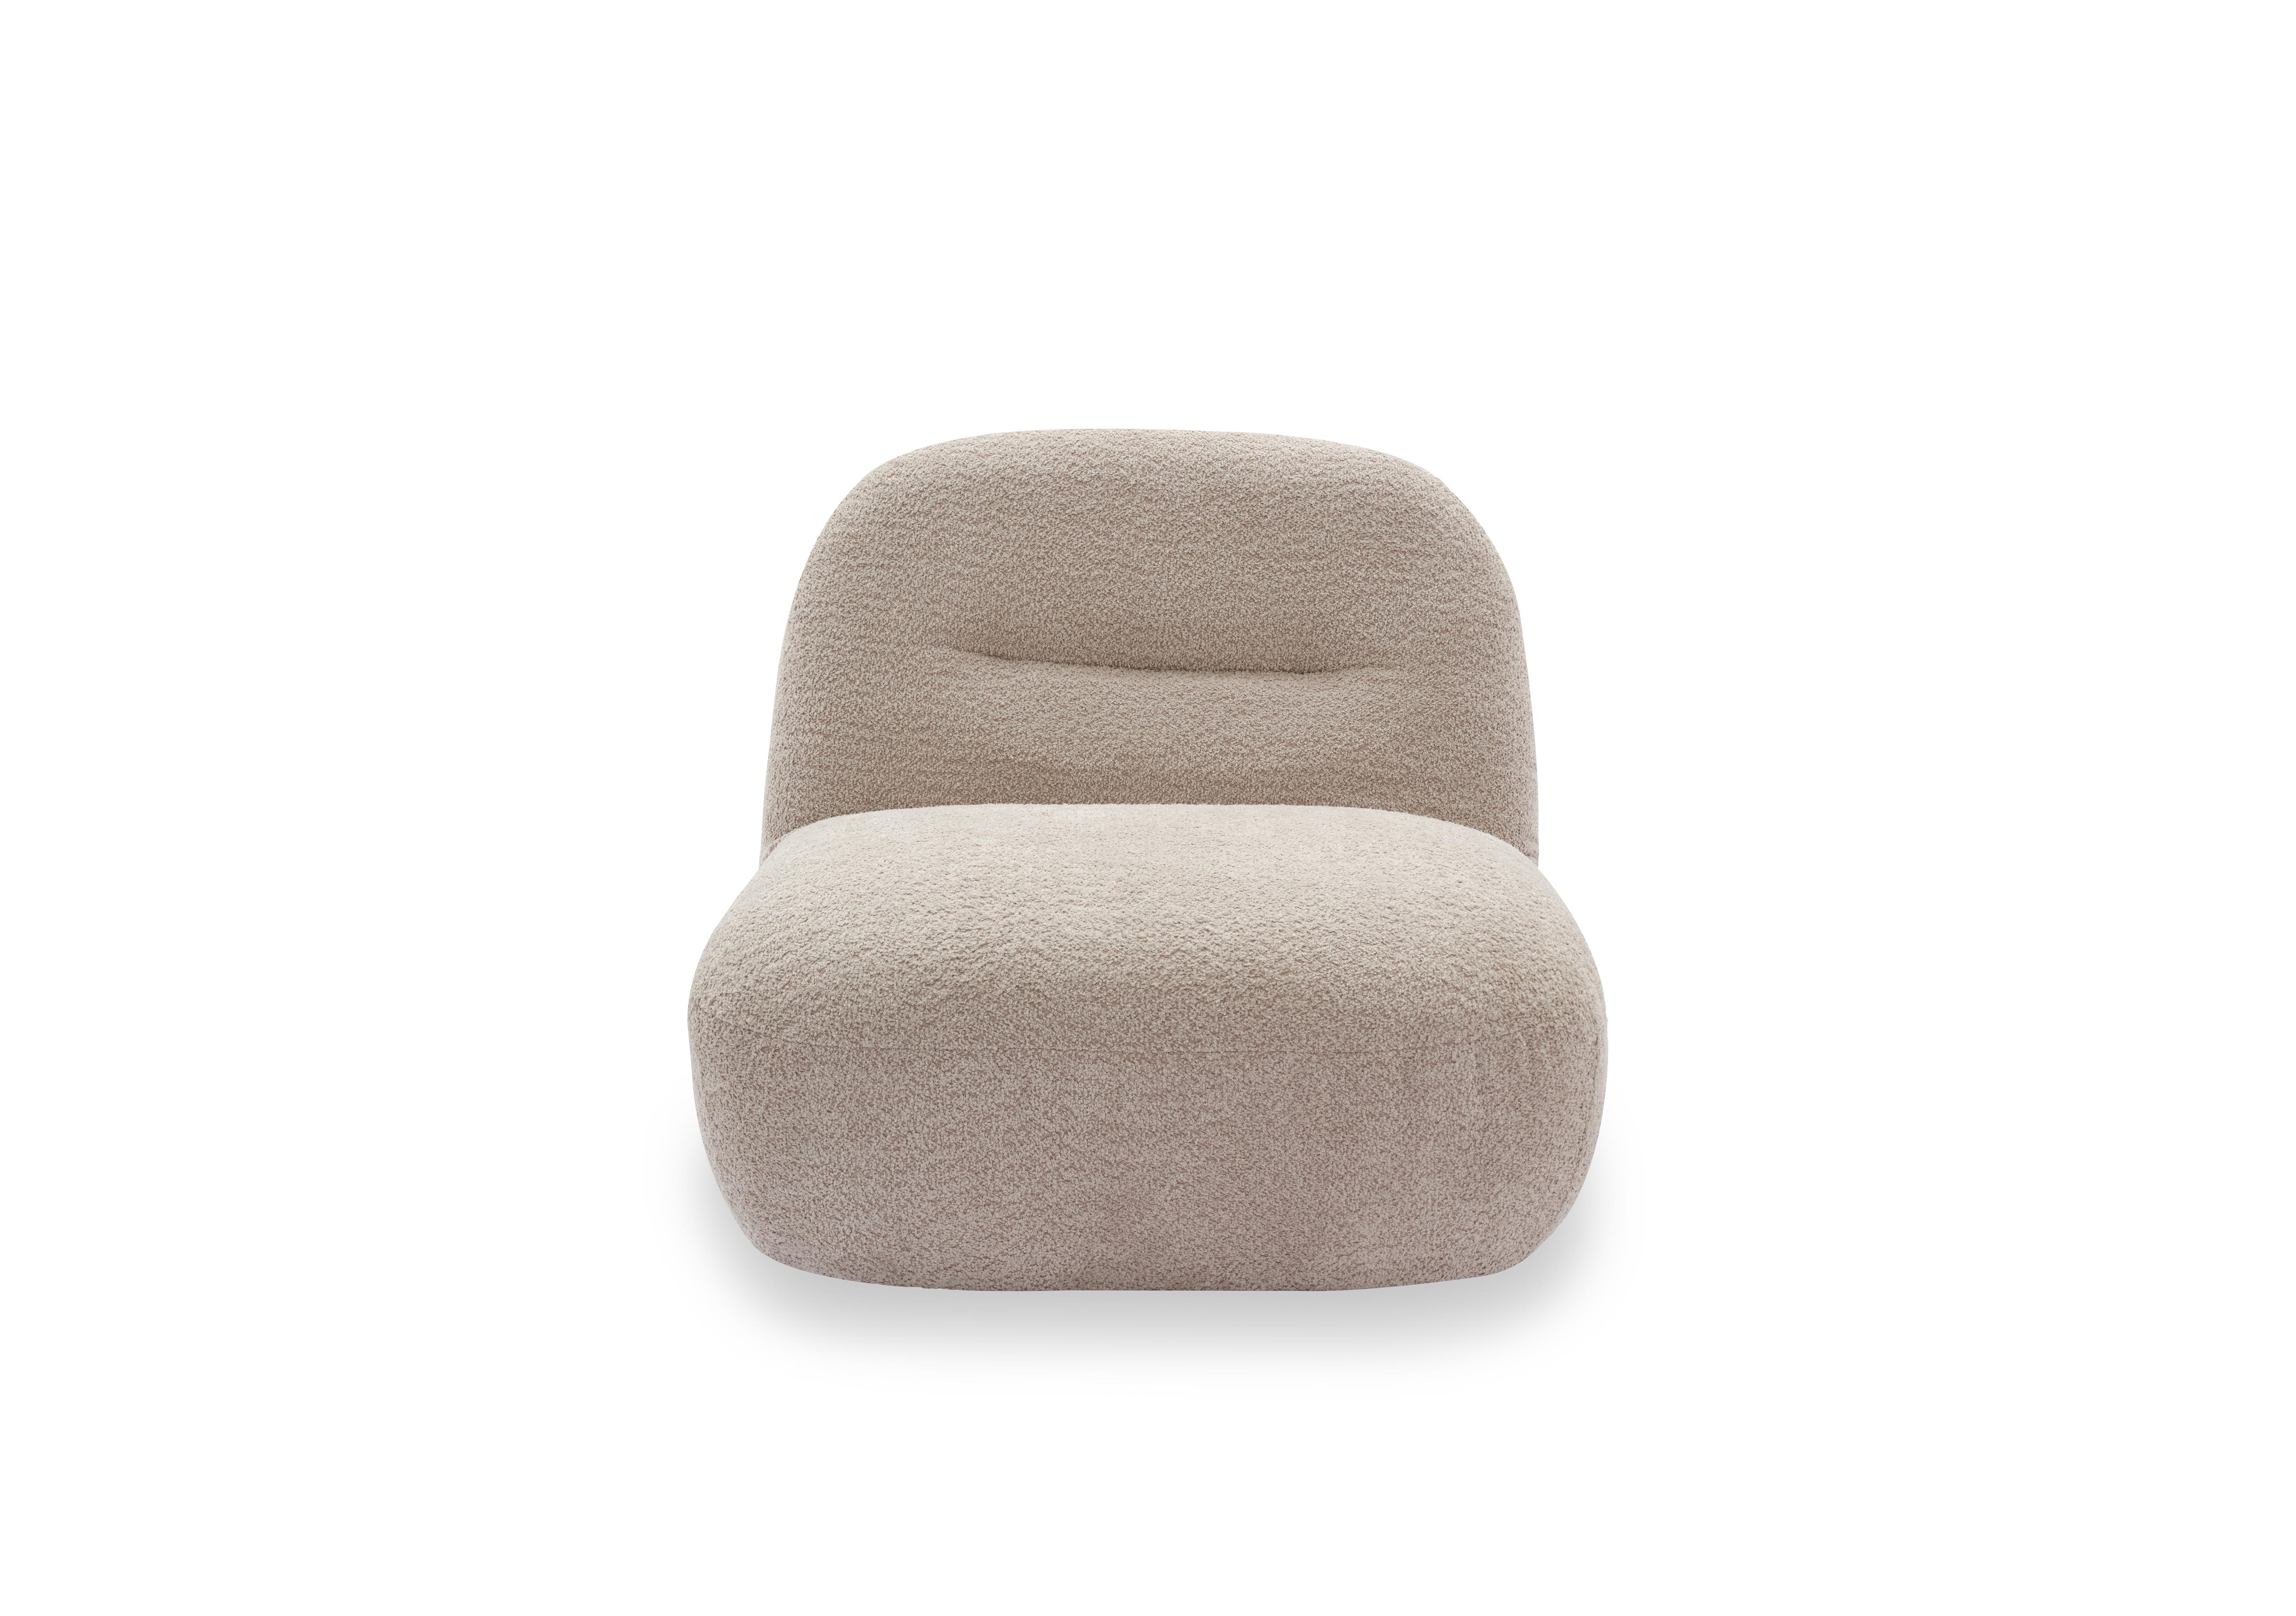 Bing Fabric Swivel Chair in Oyster on Furniture Village